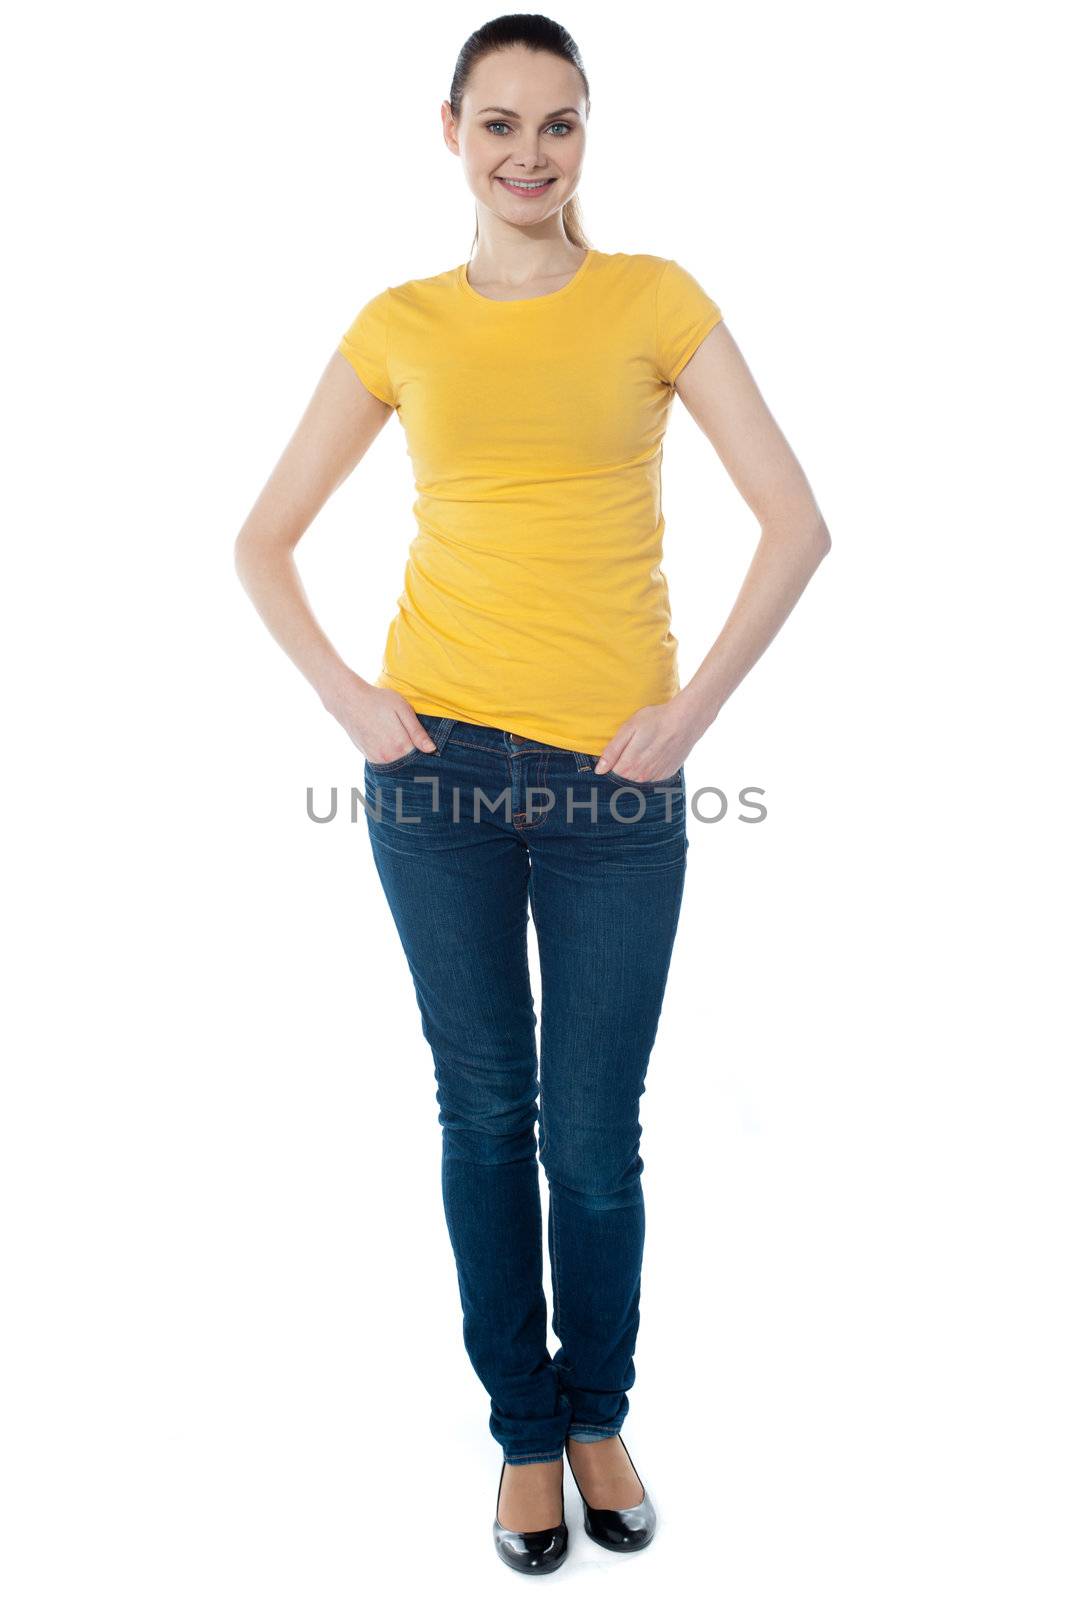 Portrait of a cute young girl standing with hands in pocket over white background